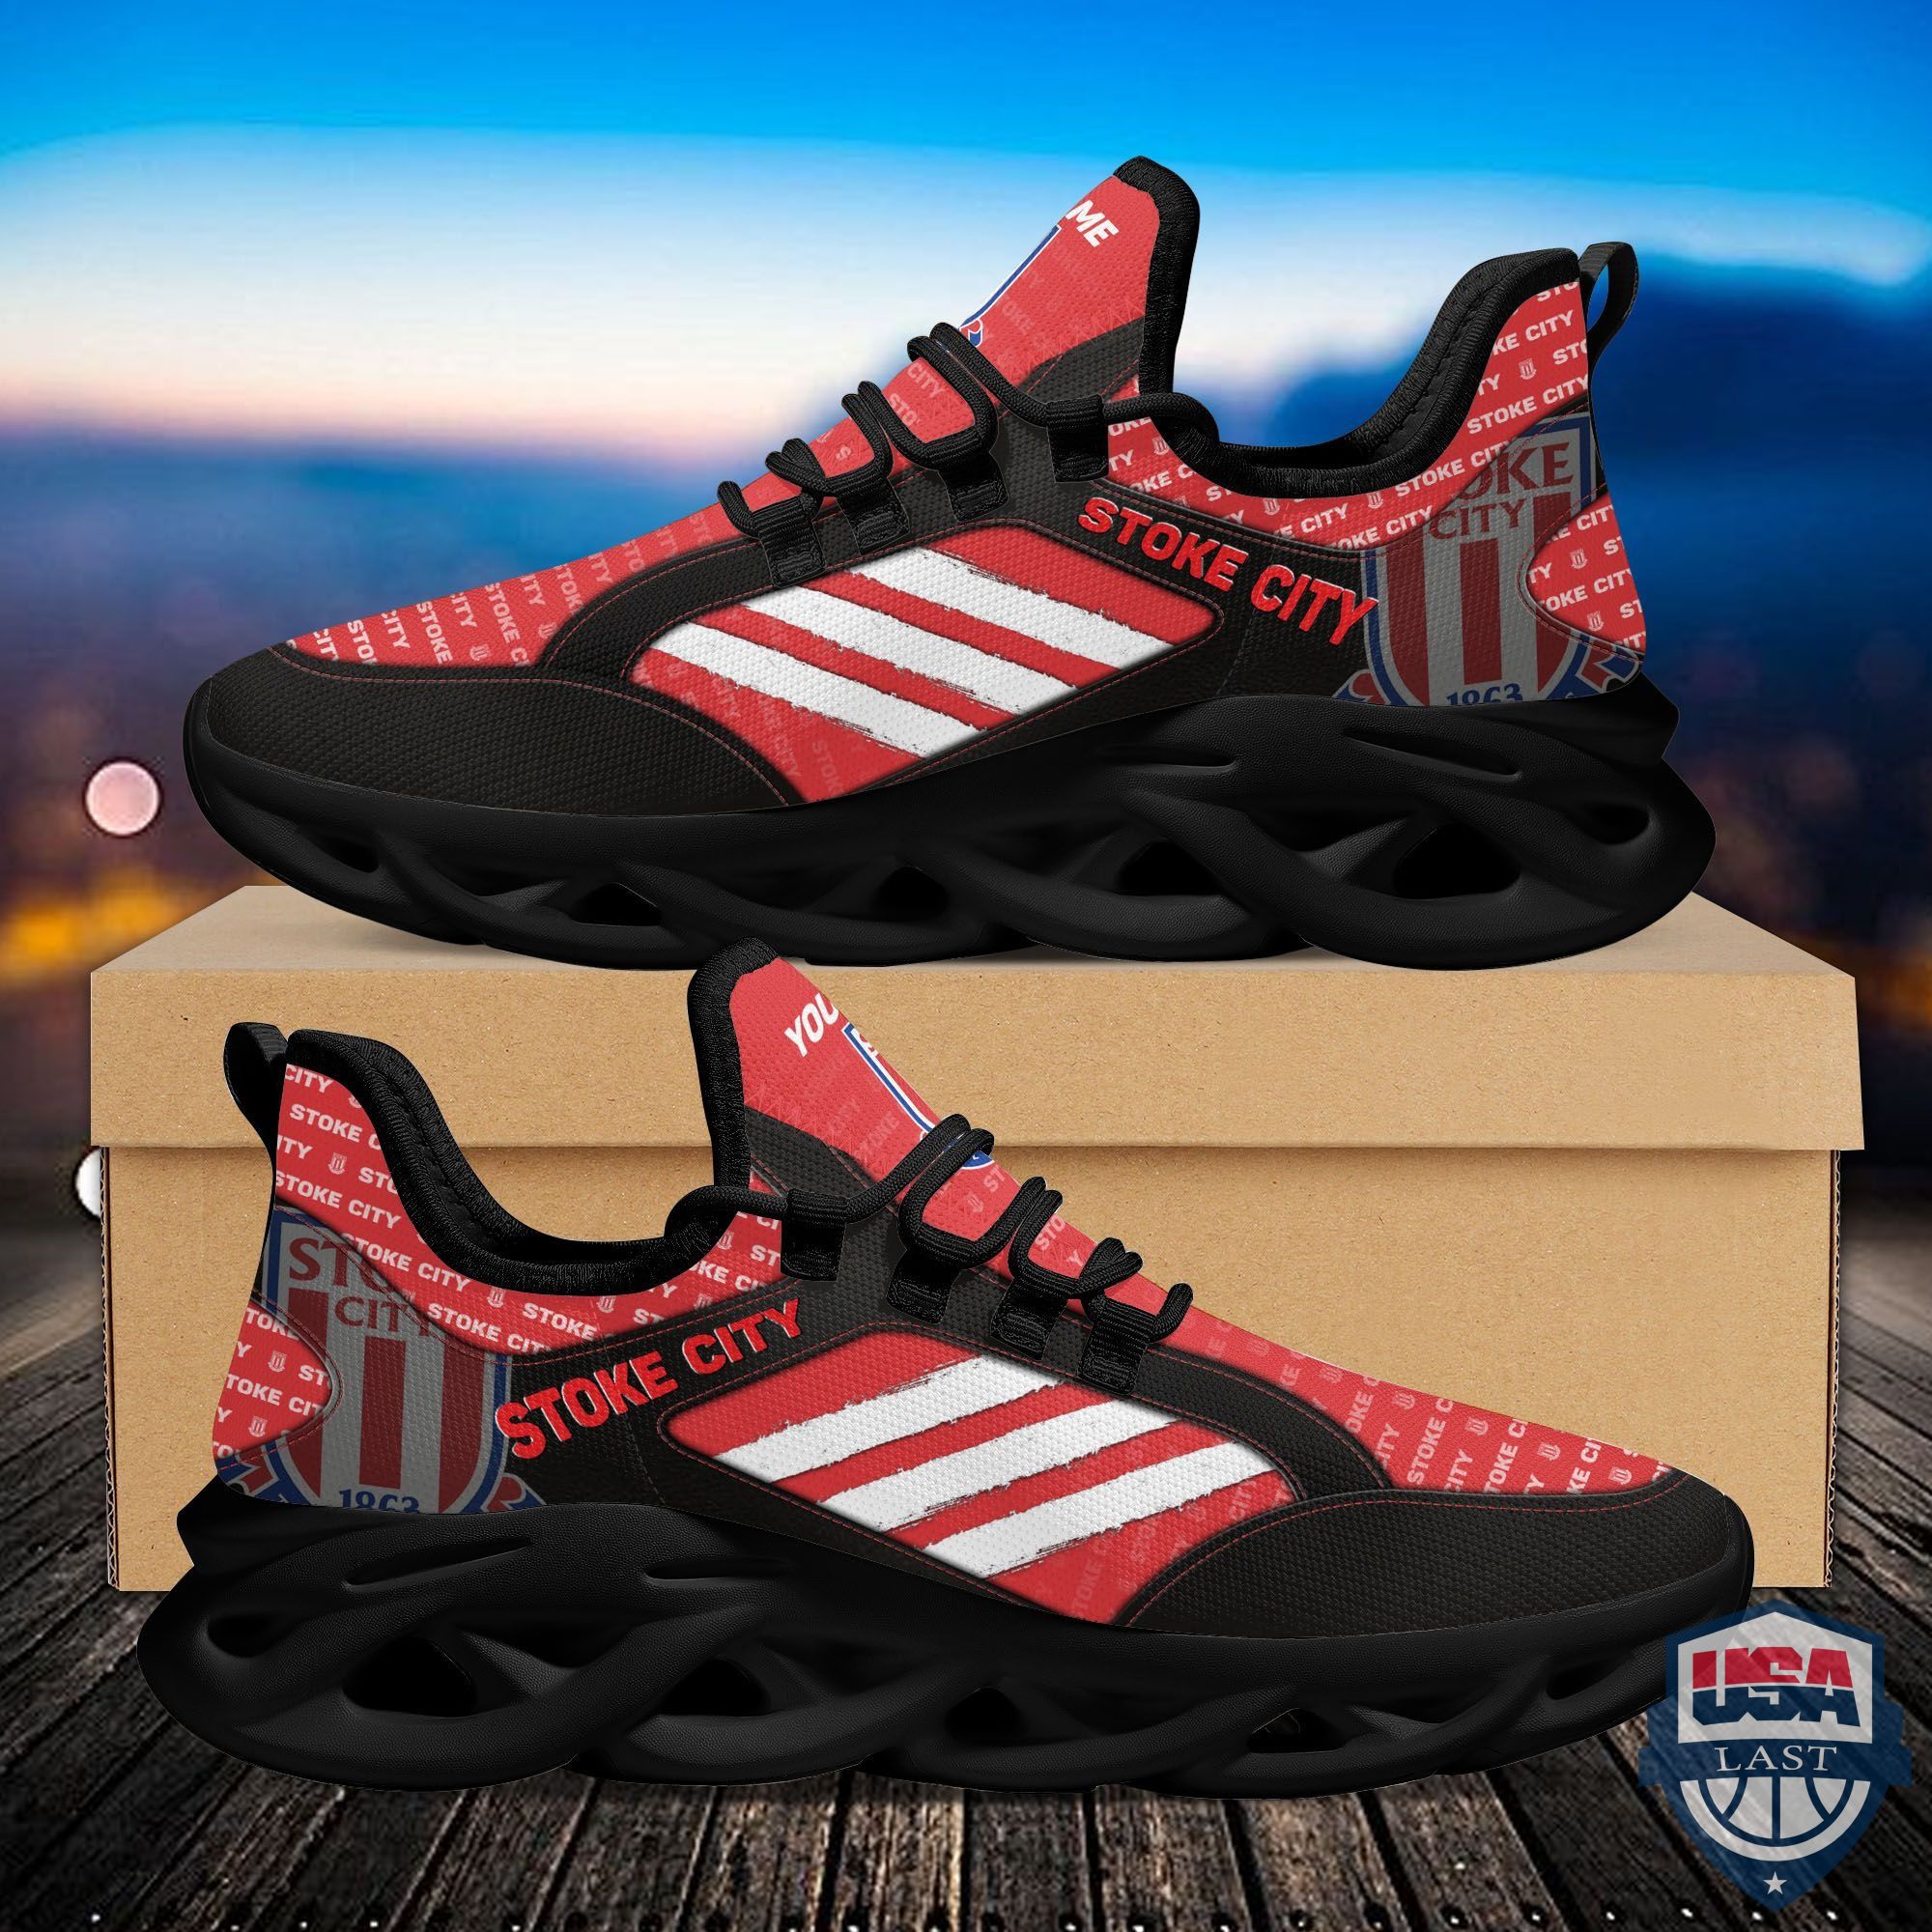 Personalized Sheffield United FC Max Soul Sneakers Running Shoes